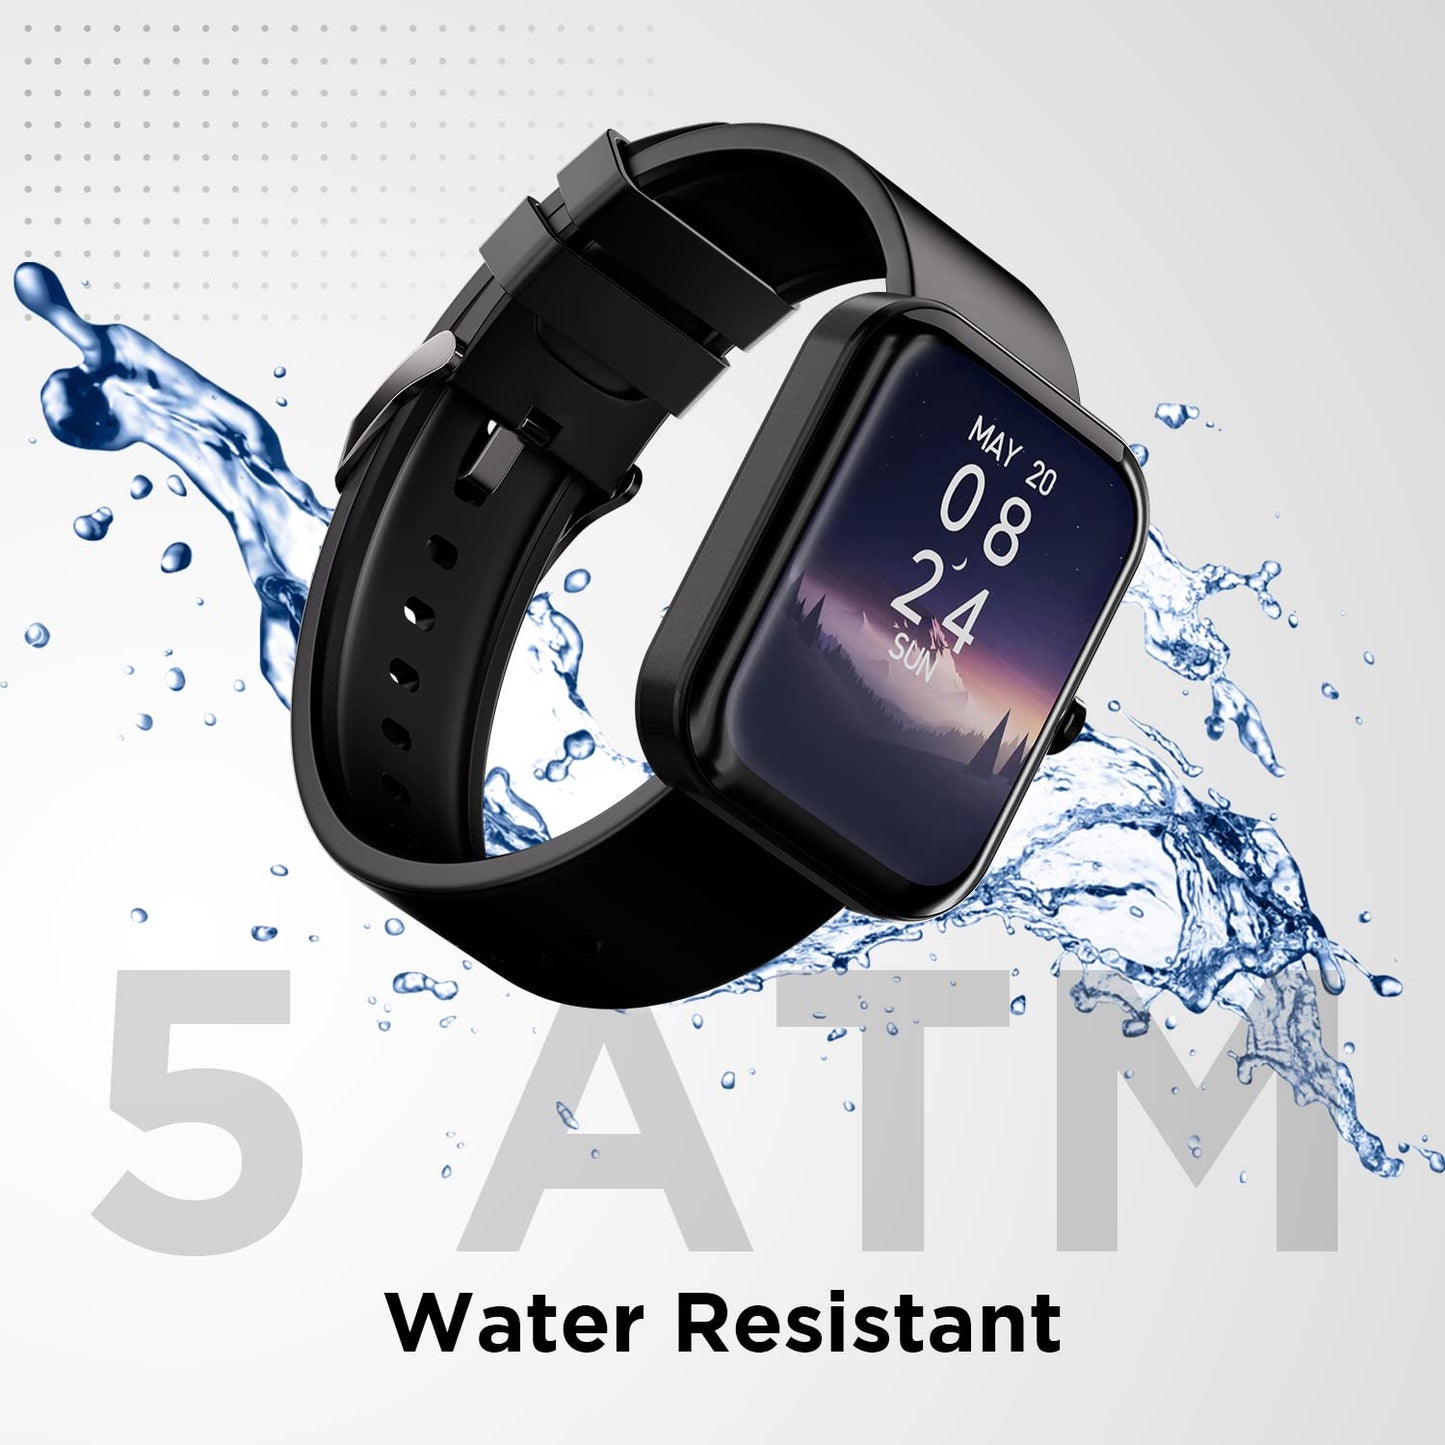 (Refurbished) Fire-Boltt Neptune Smartwatch 1.69" Full Touch HD Display with 240*280 High Res, 5ATM Water Resistance, 118 Sports Modes with Fast Charging, SpO2 Monitoring, Games